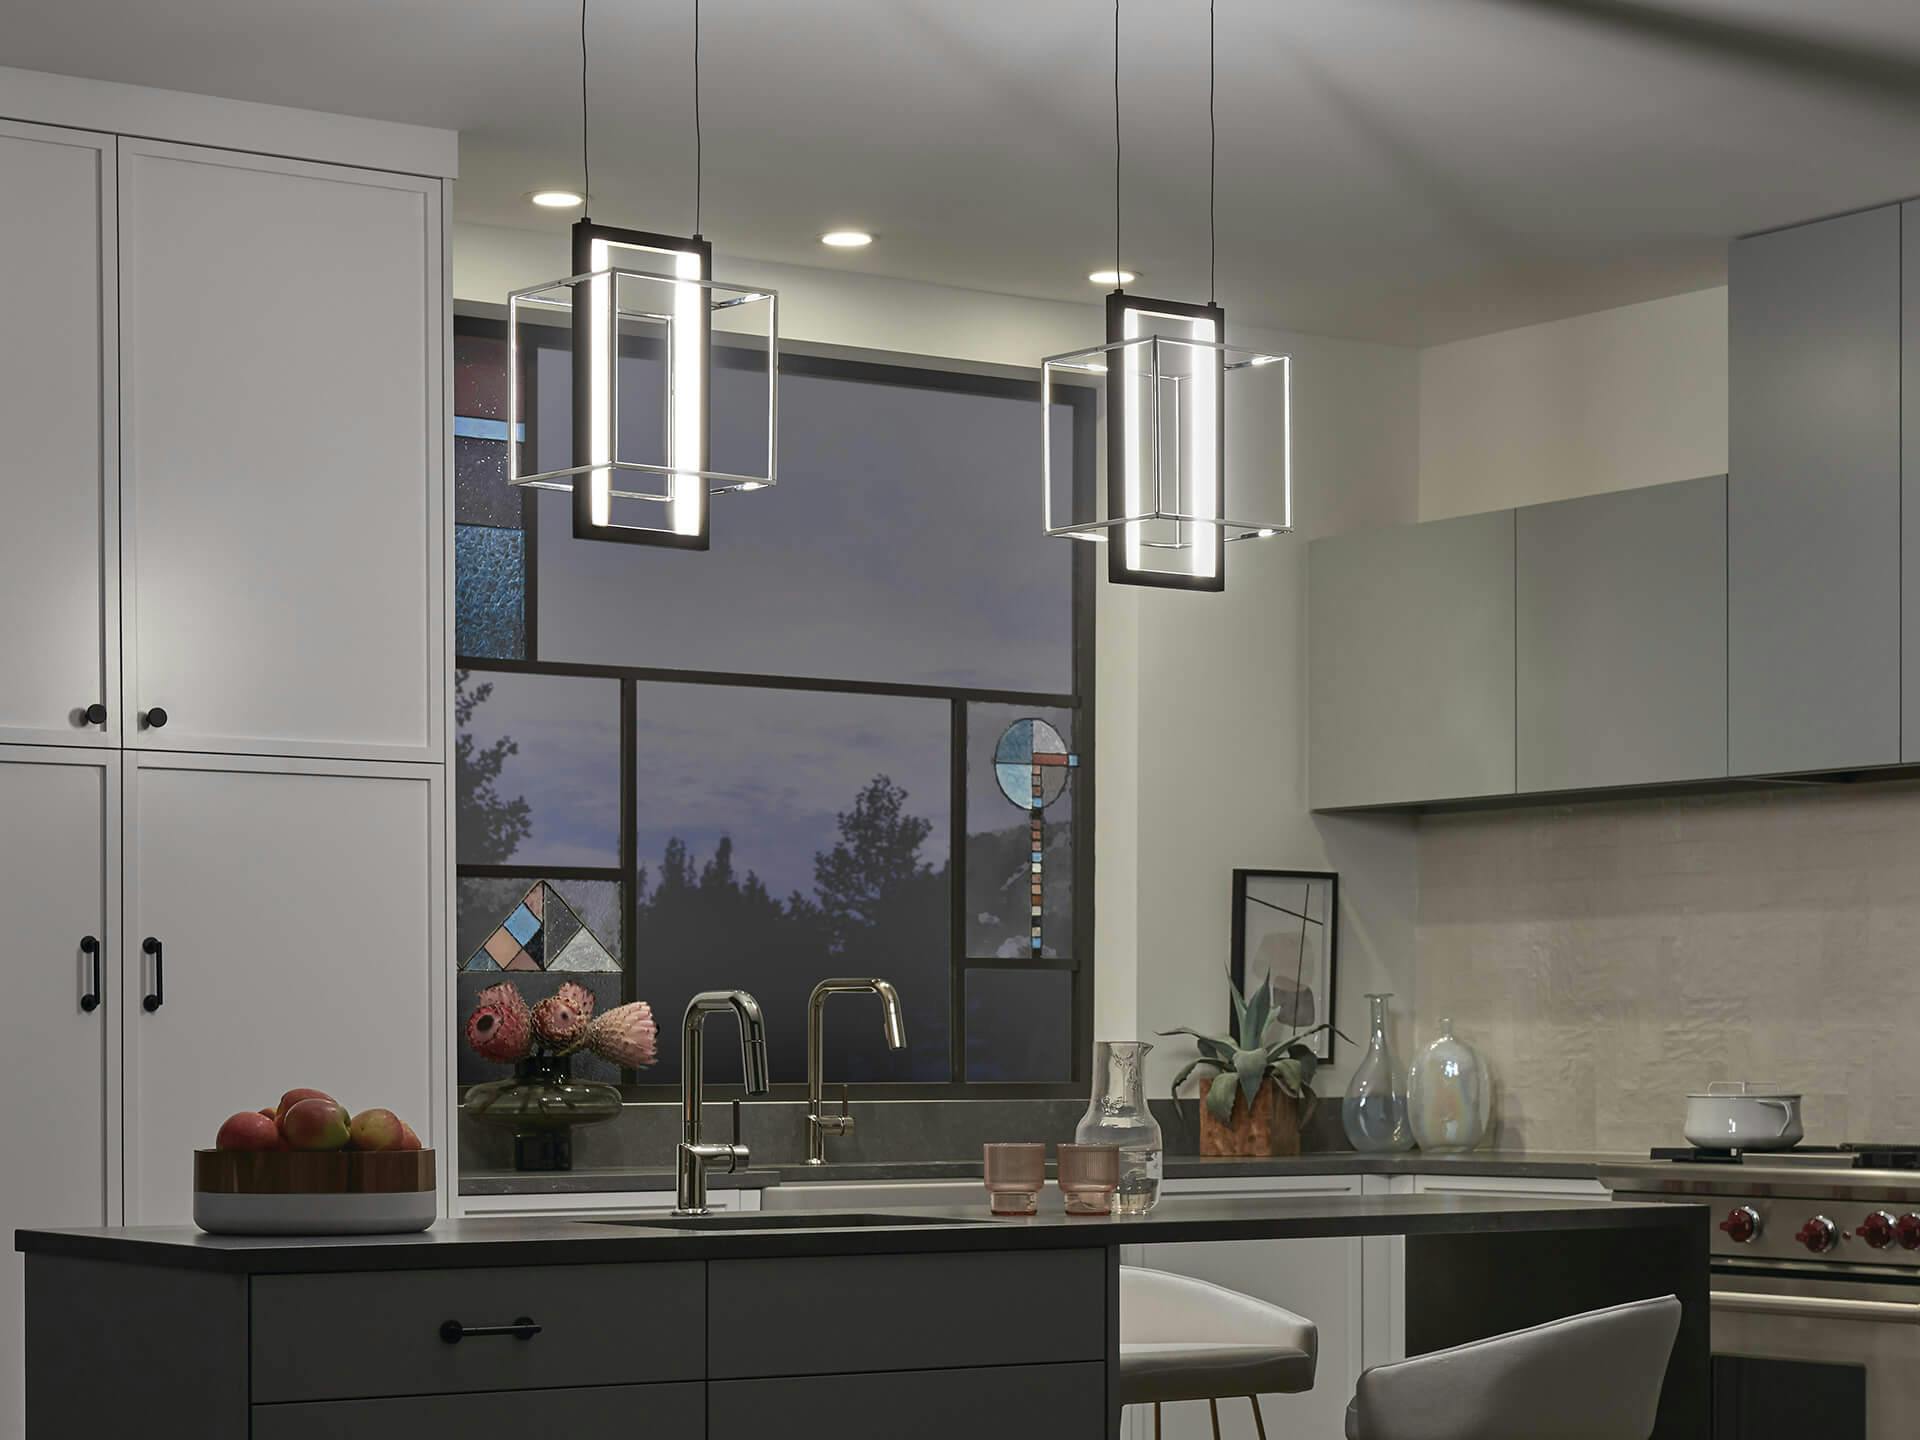 Modern kitchen at night with two Viho pendant lights hanging above a kitchen island